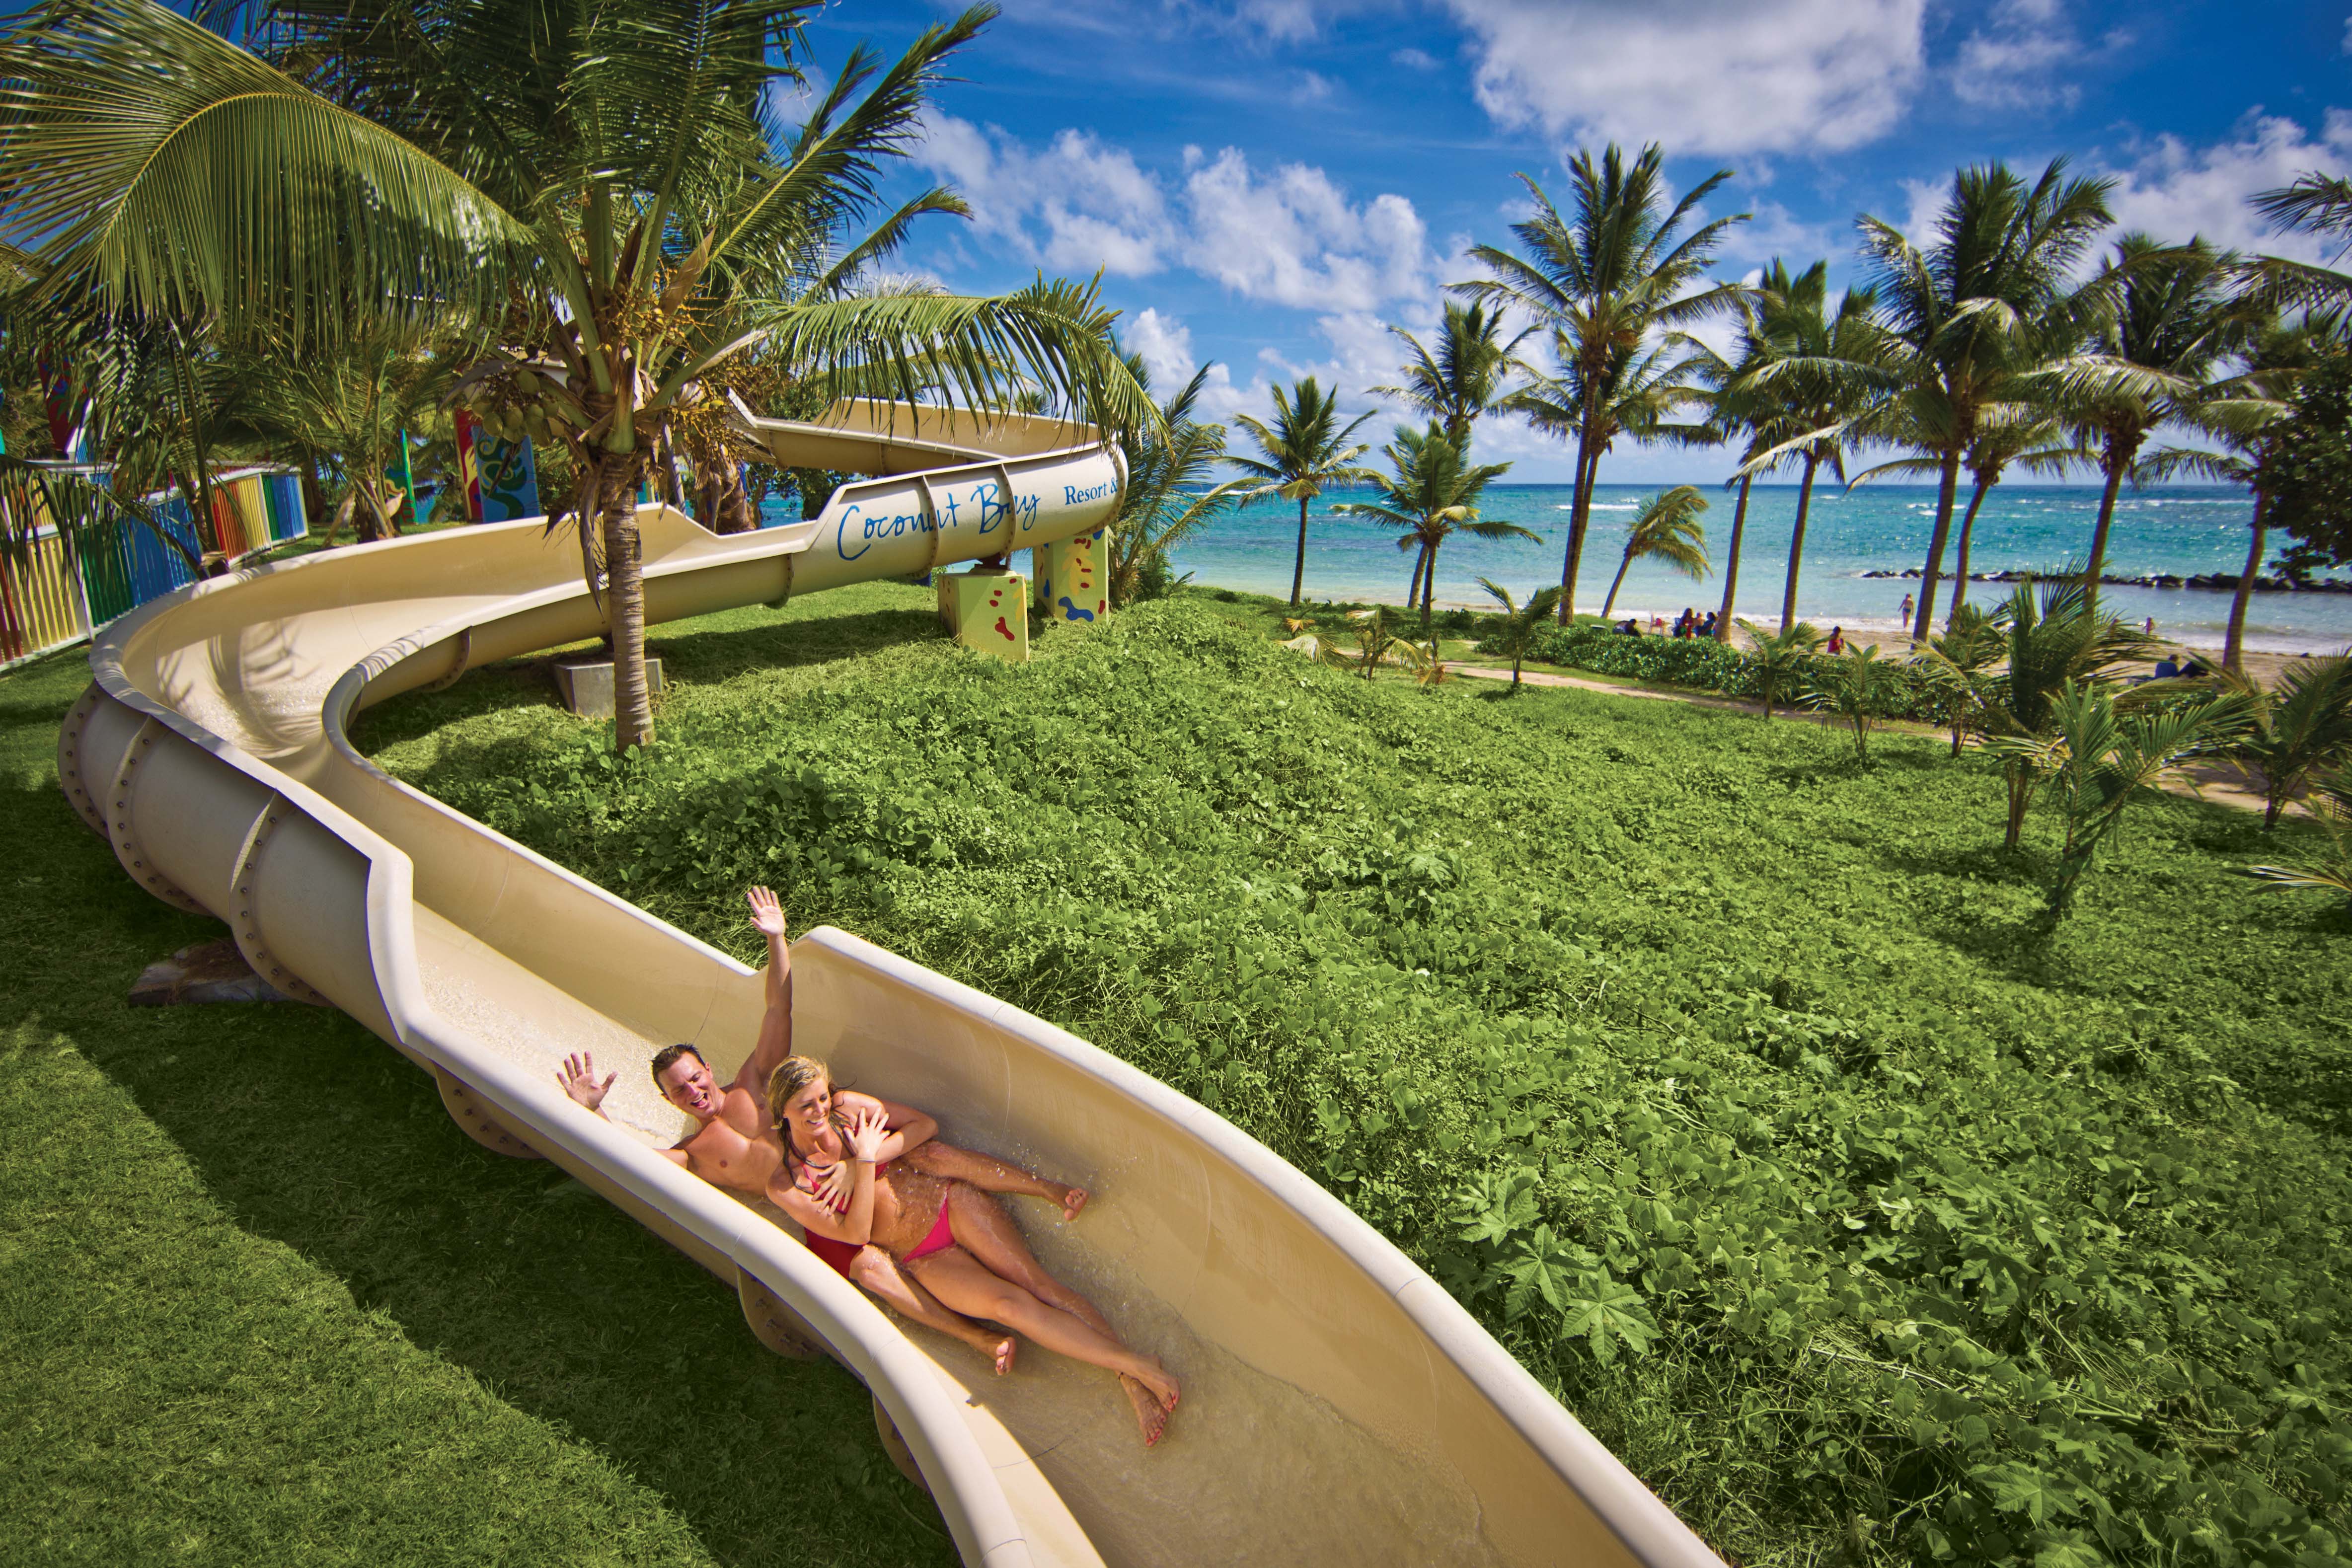 No long lines to go twisting through the Coconut Coaster waterslide at Coconut Bay Beach Resort & Spa.